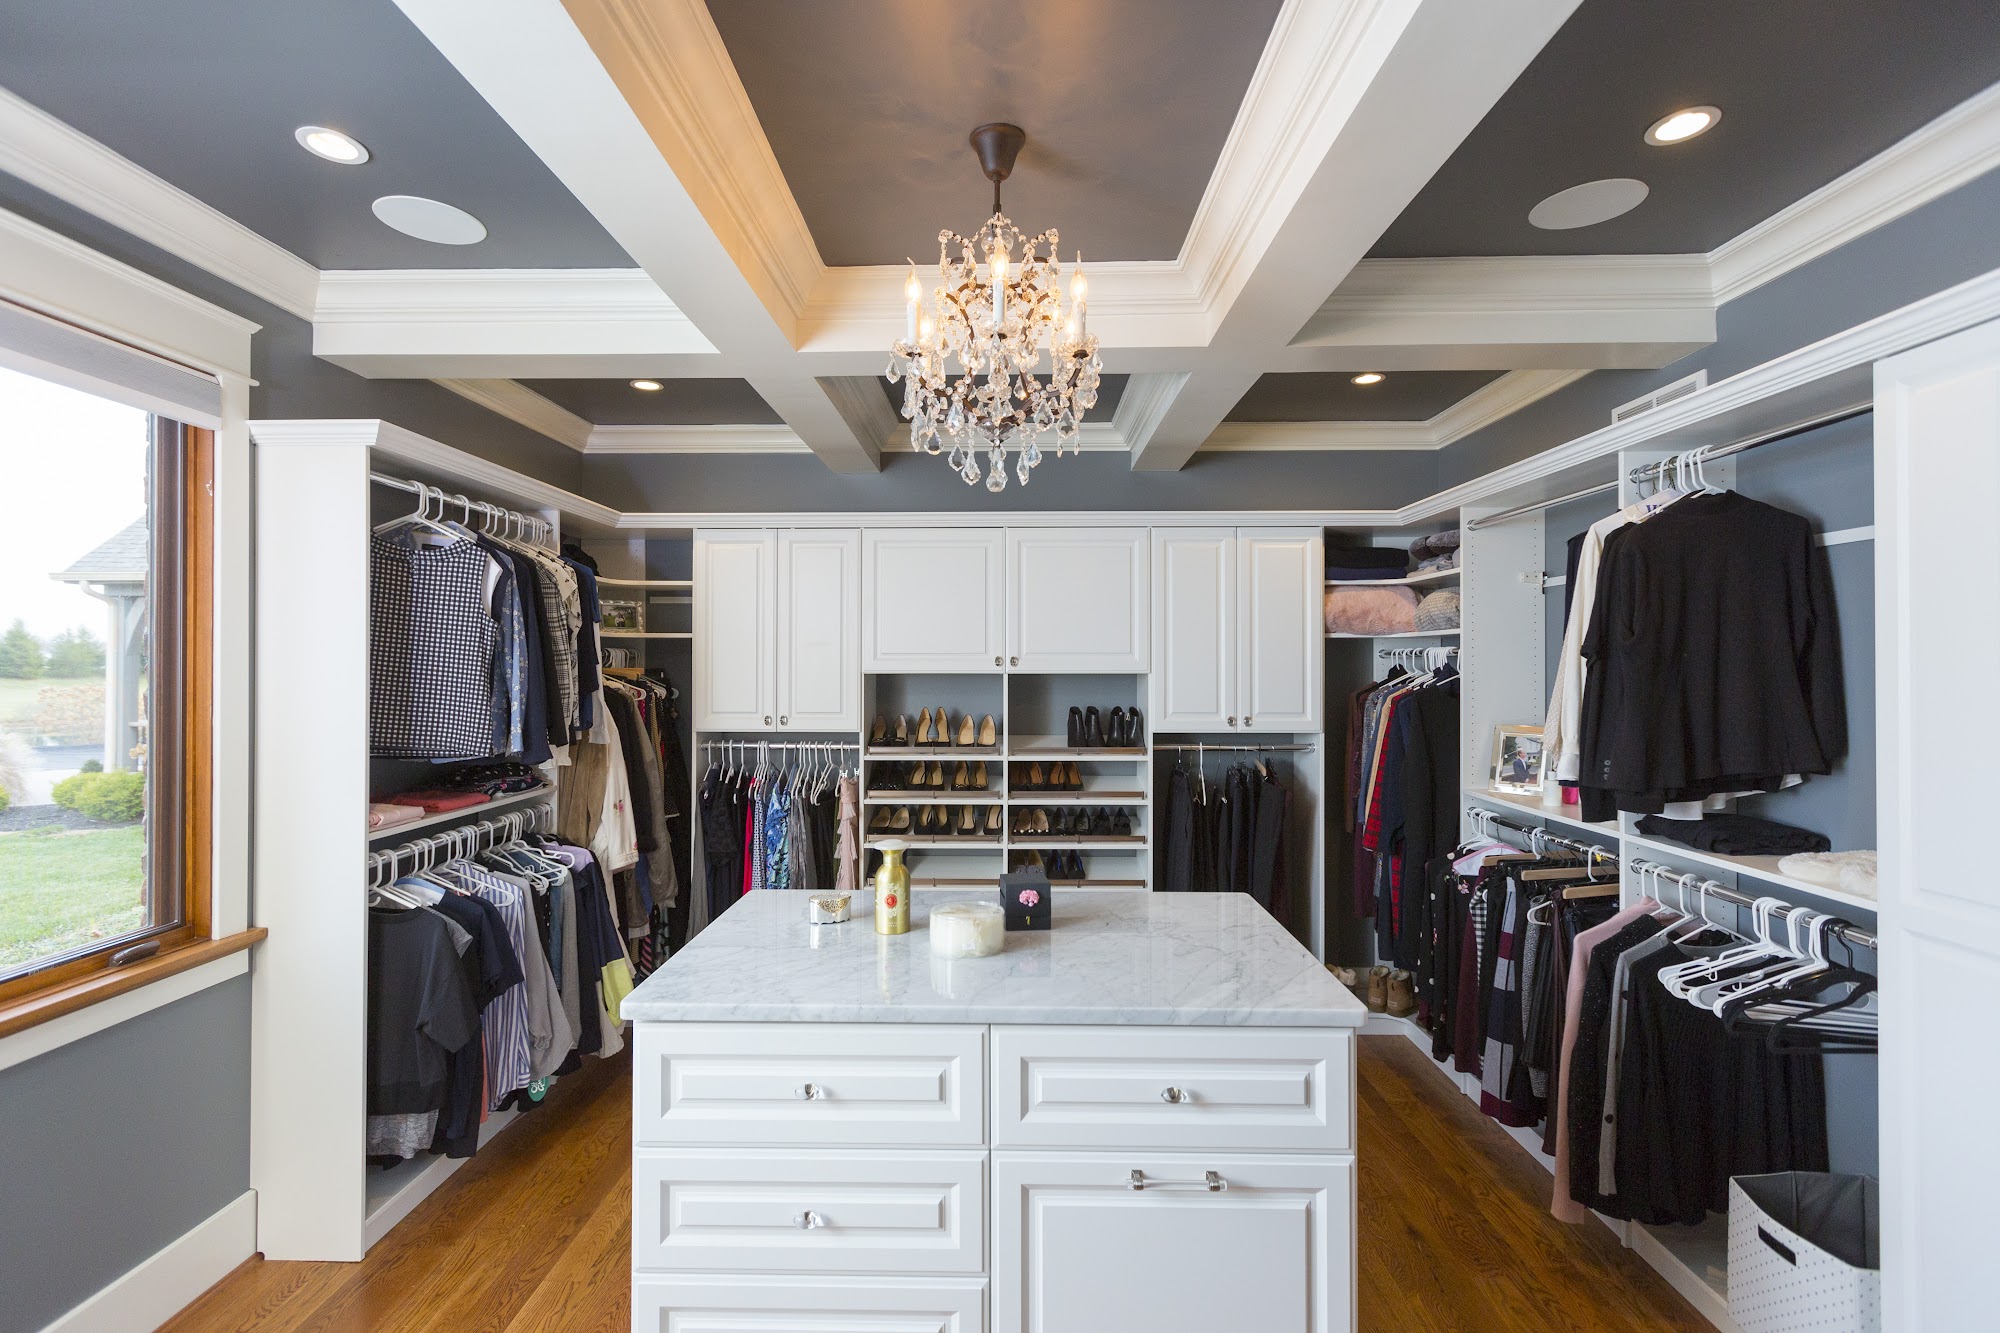 Closets and More, Inc.